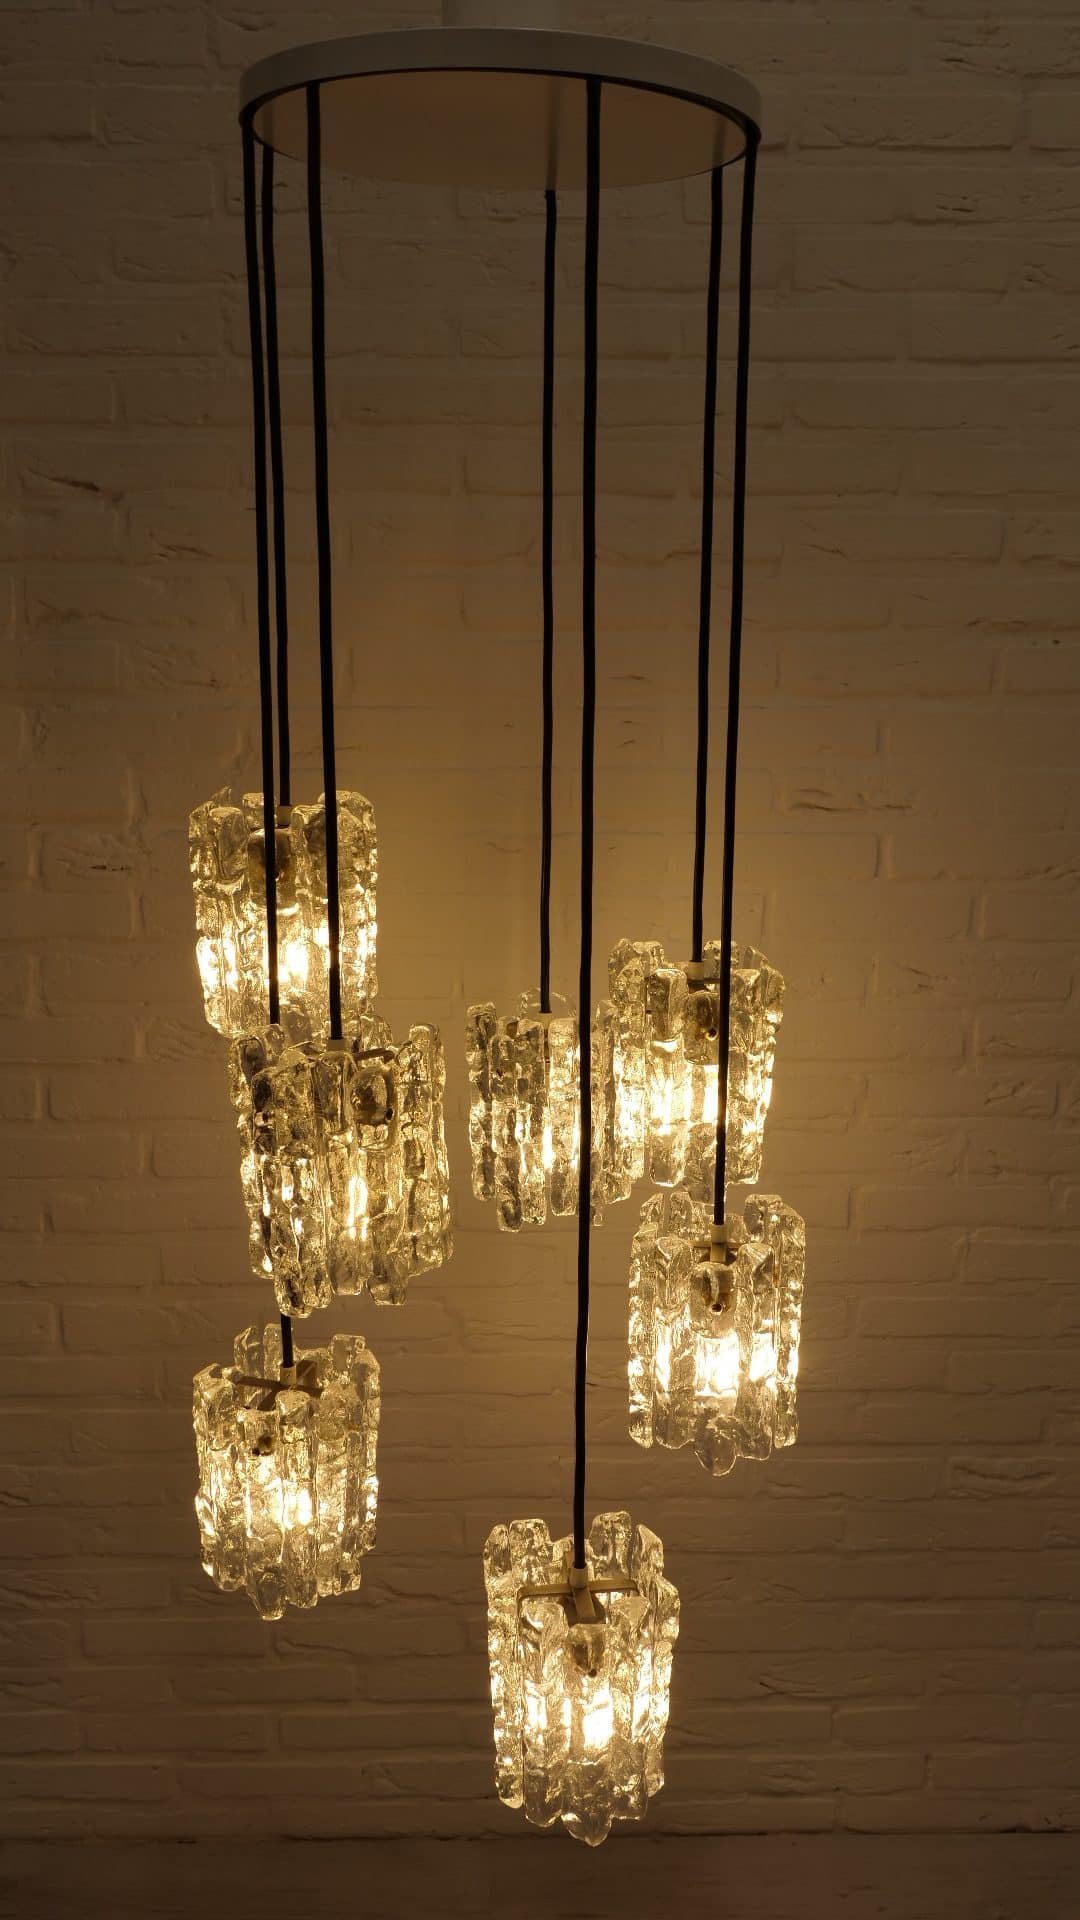 Trp Post Container Data Trp Post Id 6128 Cascade Pendant Lamp J T Kalmar Ice Glass Sierra Trp Post Container